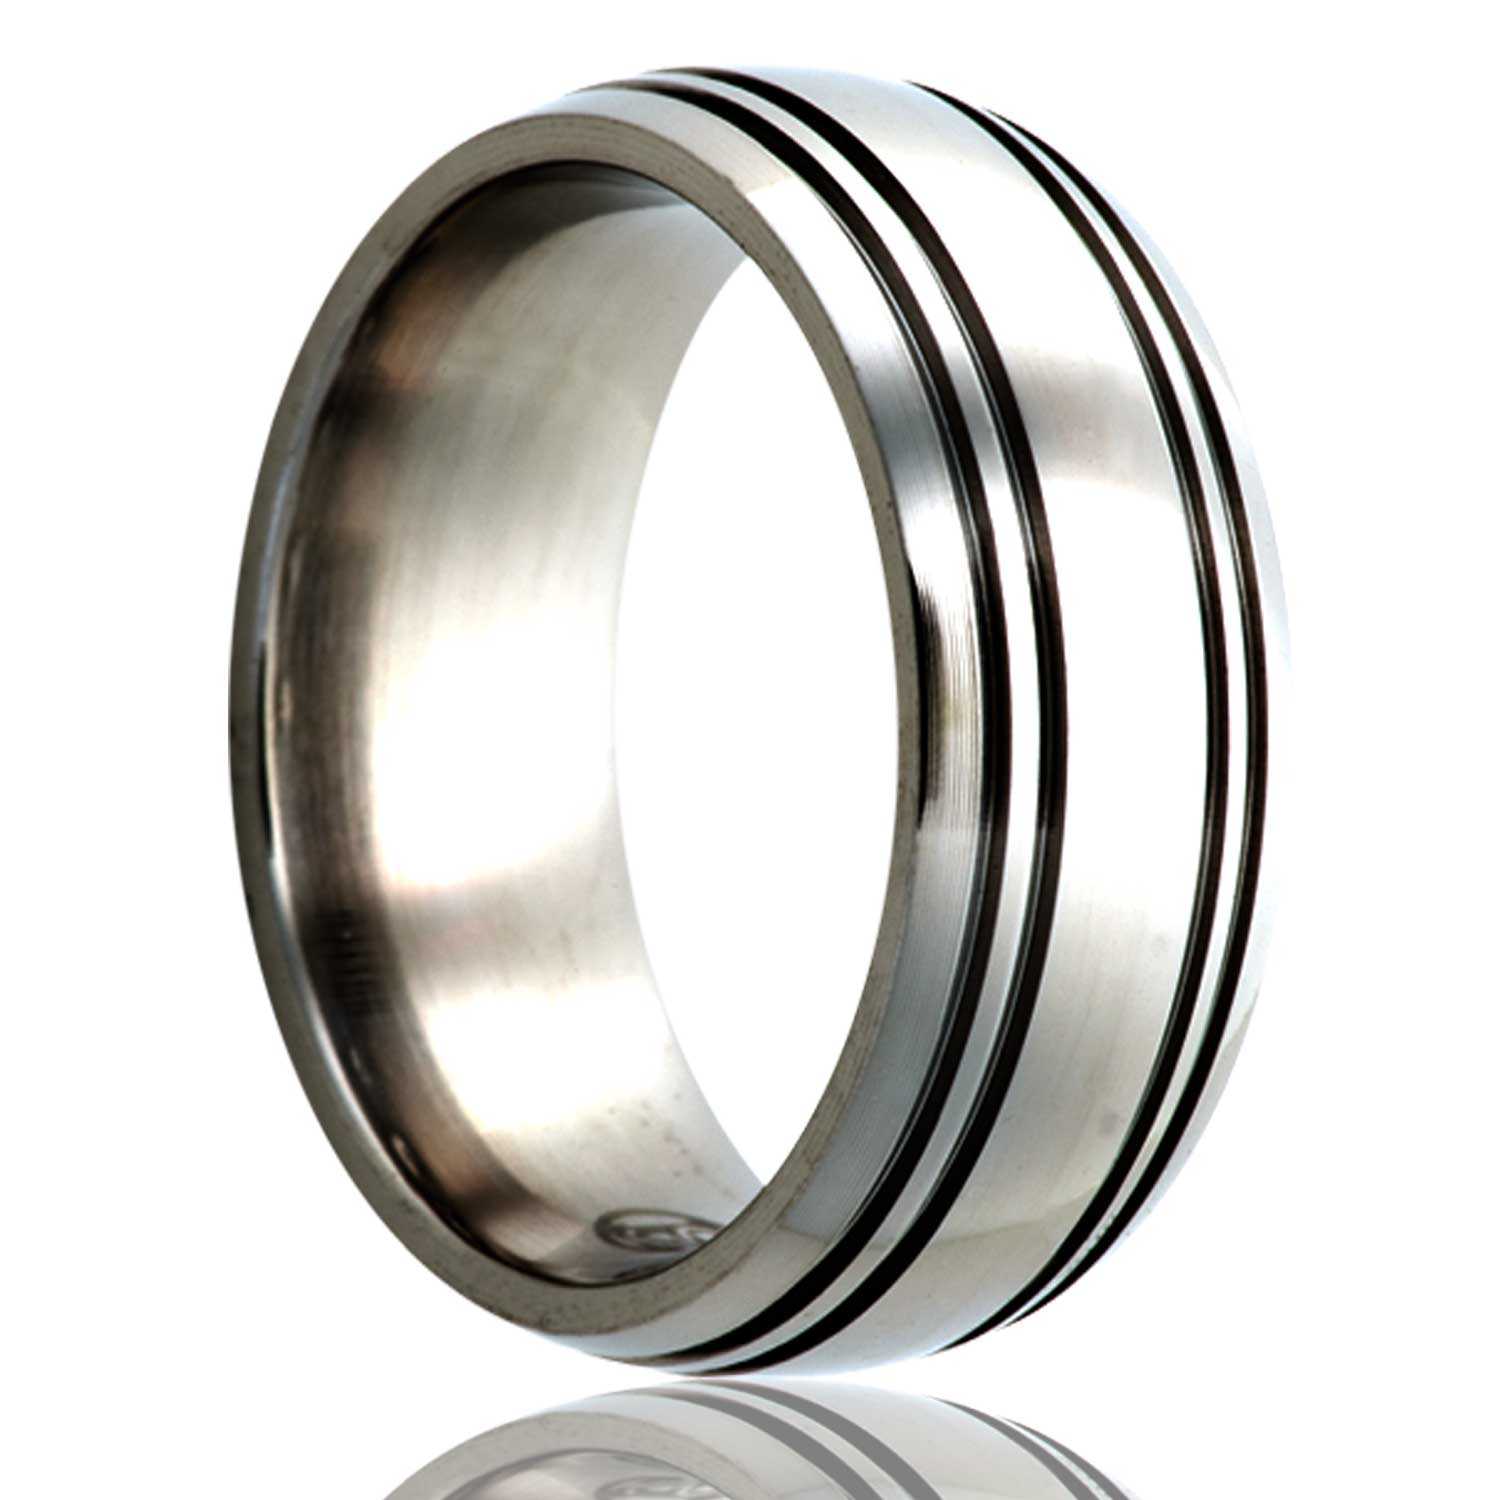 A domed titanium wedding band with quadruple grooves displayed on a neutral white background.